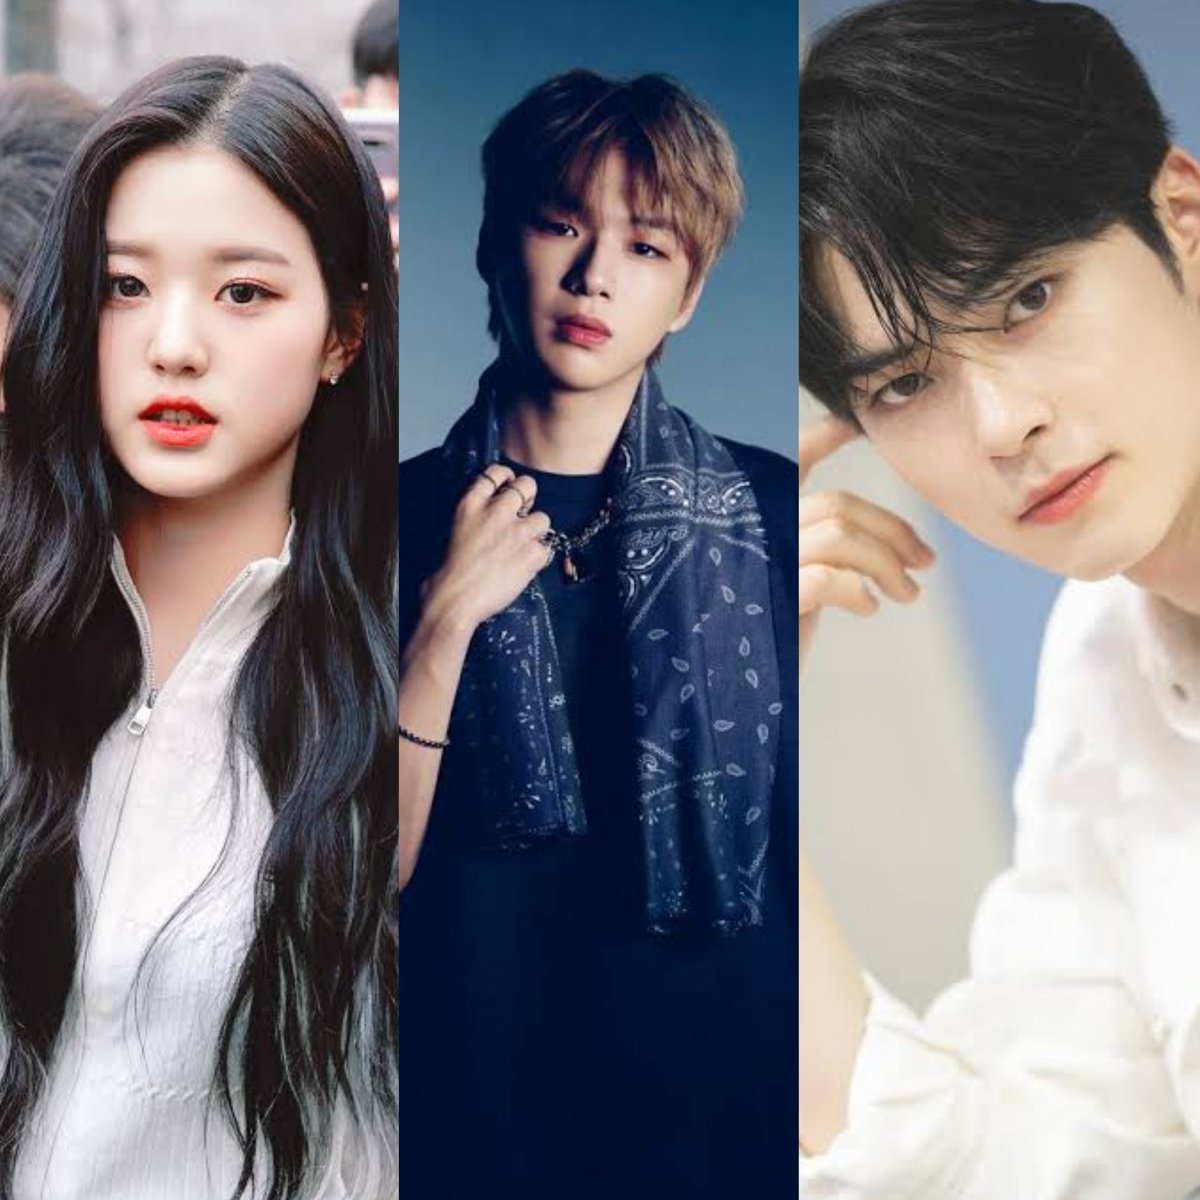 Wonyoung Jang, Daniel Kang, and Hanbin Seong will be the MCs for the  '2023 Asia Artist Awards' at the Philippine Arena on December 14th via Starnews. @pulpliveworld @happeehour @Vernon_Go